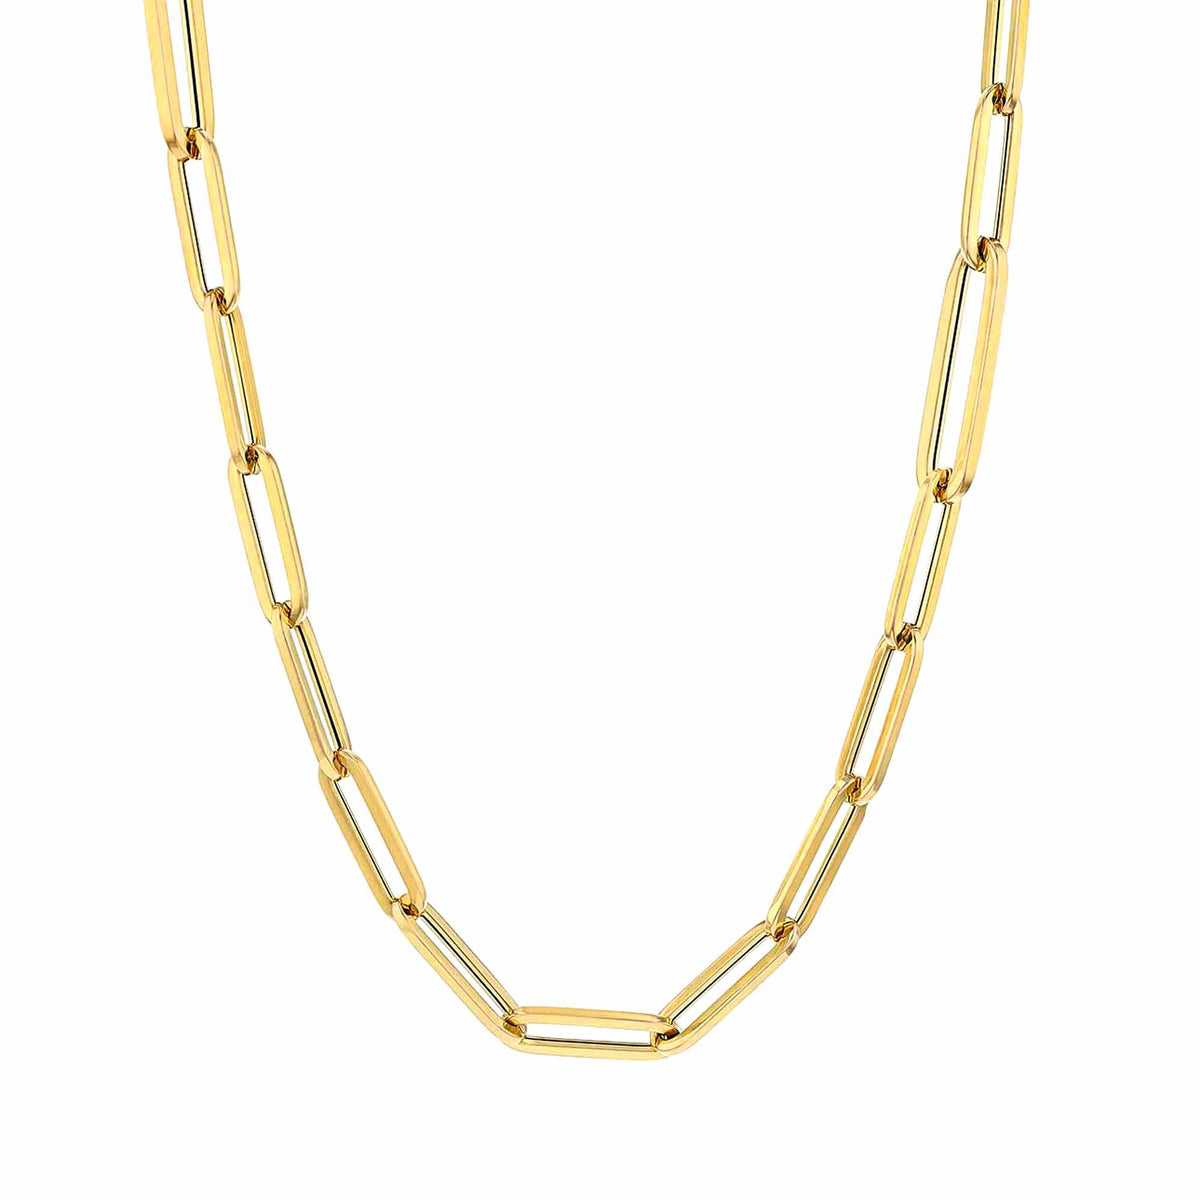 14k Yellow Gold Paperclip Chain Bracelet, 7" fine designer jewelry for men and women